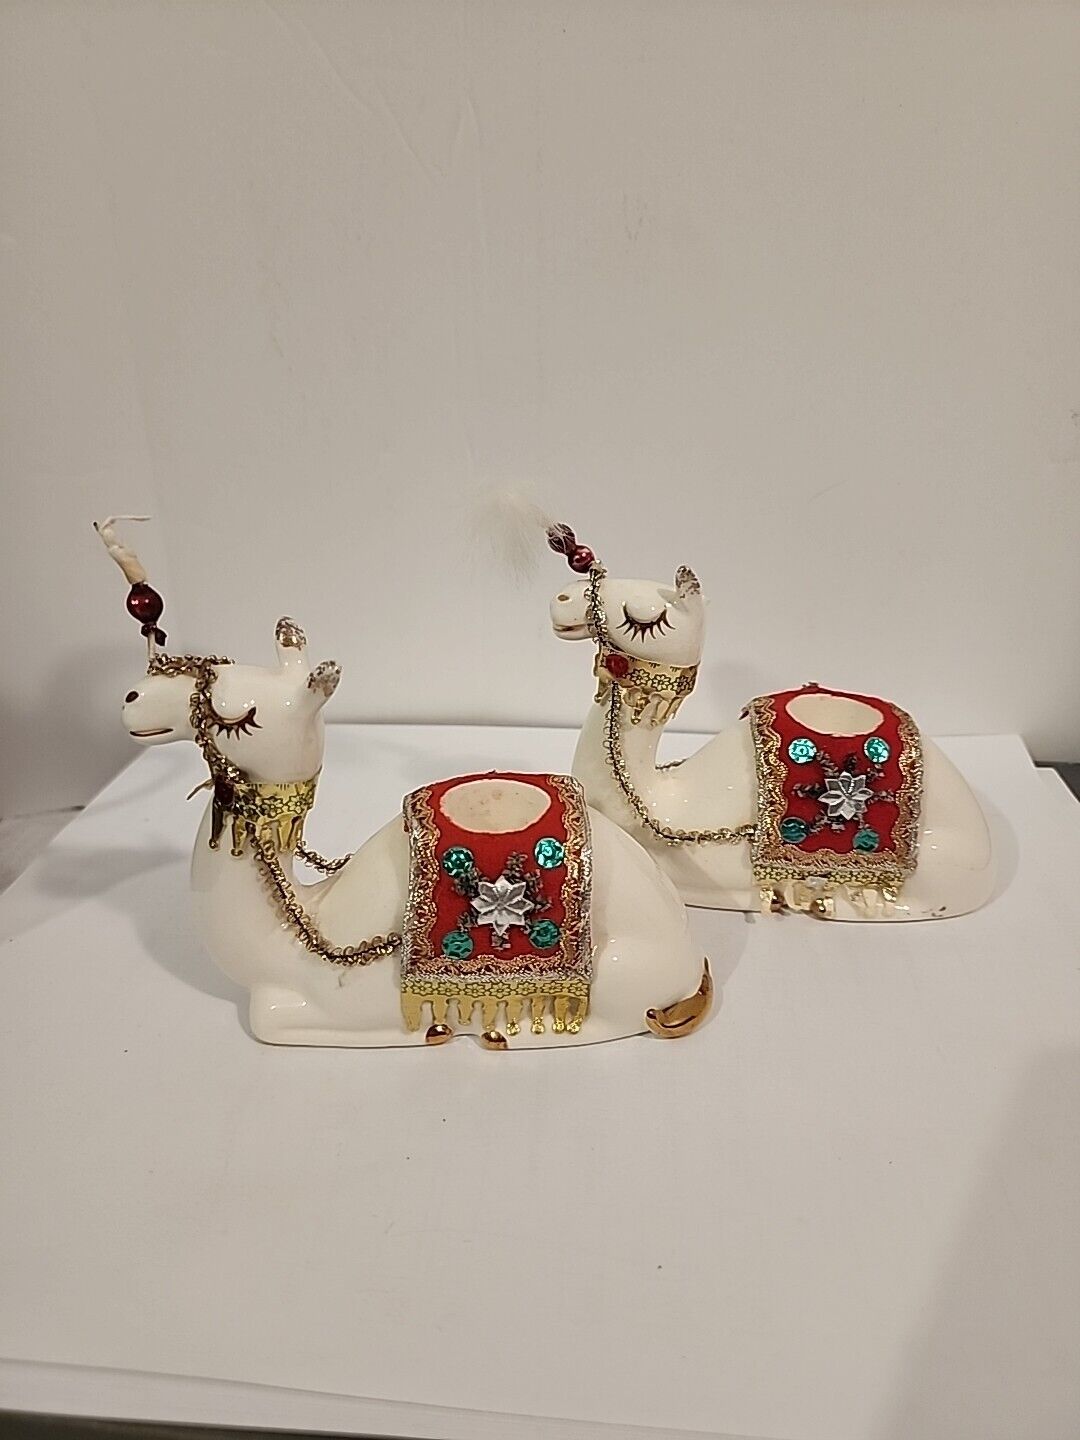 Vintage Holt Howard Camel Candleholder 1960 Lot of 2 Ceramic SEE PICS 4 CONDITIO